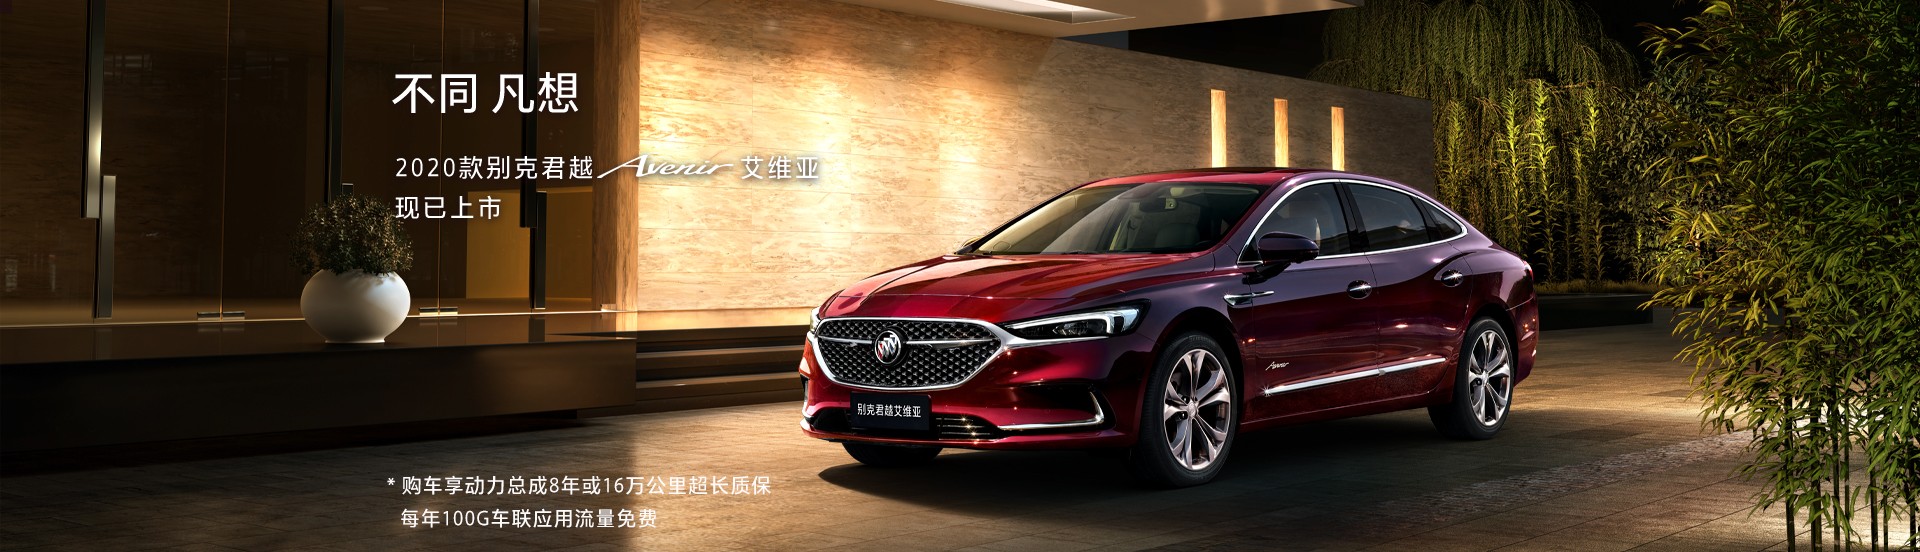 2021 buick lacrosse facelift looks pretty luxurious with